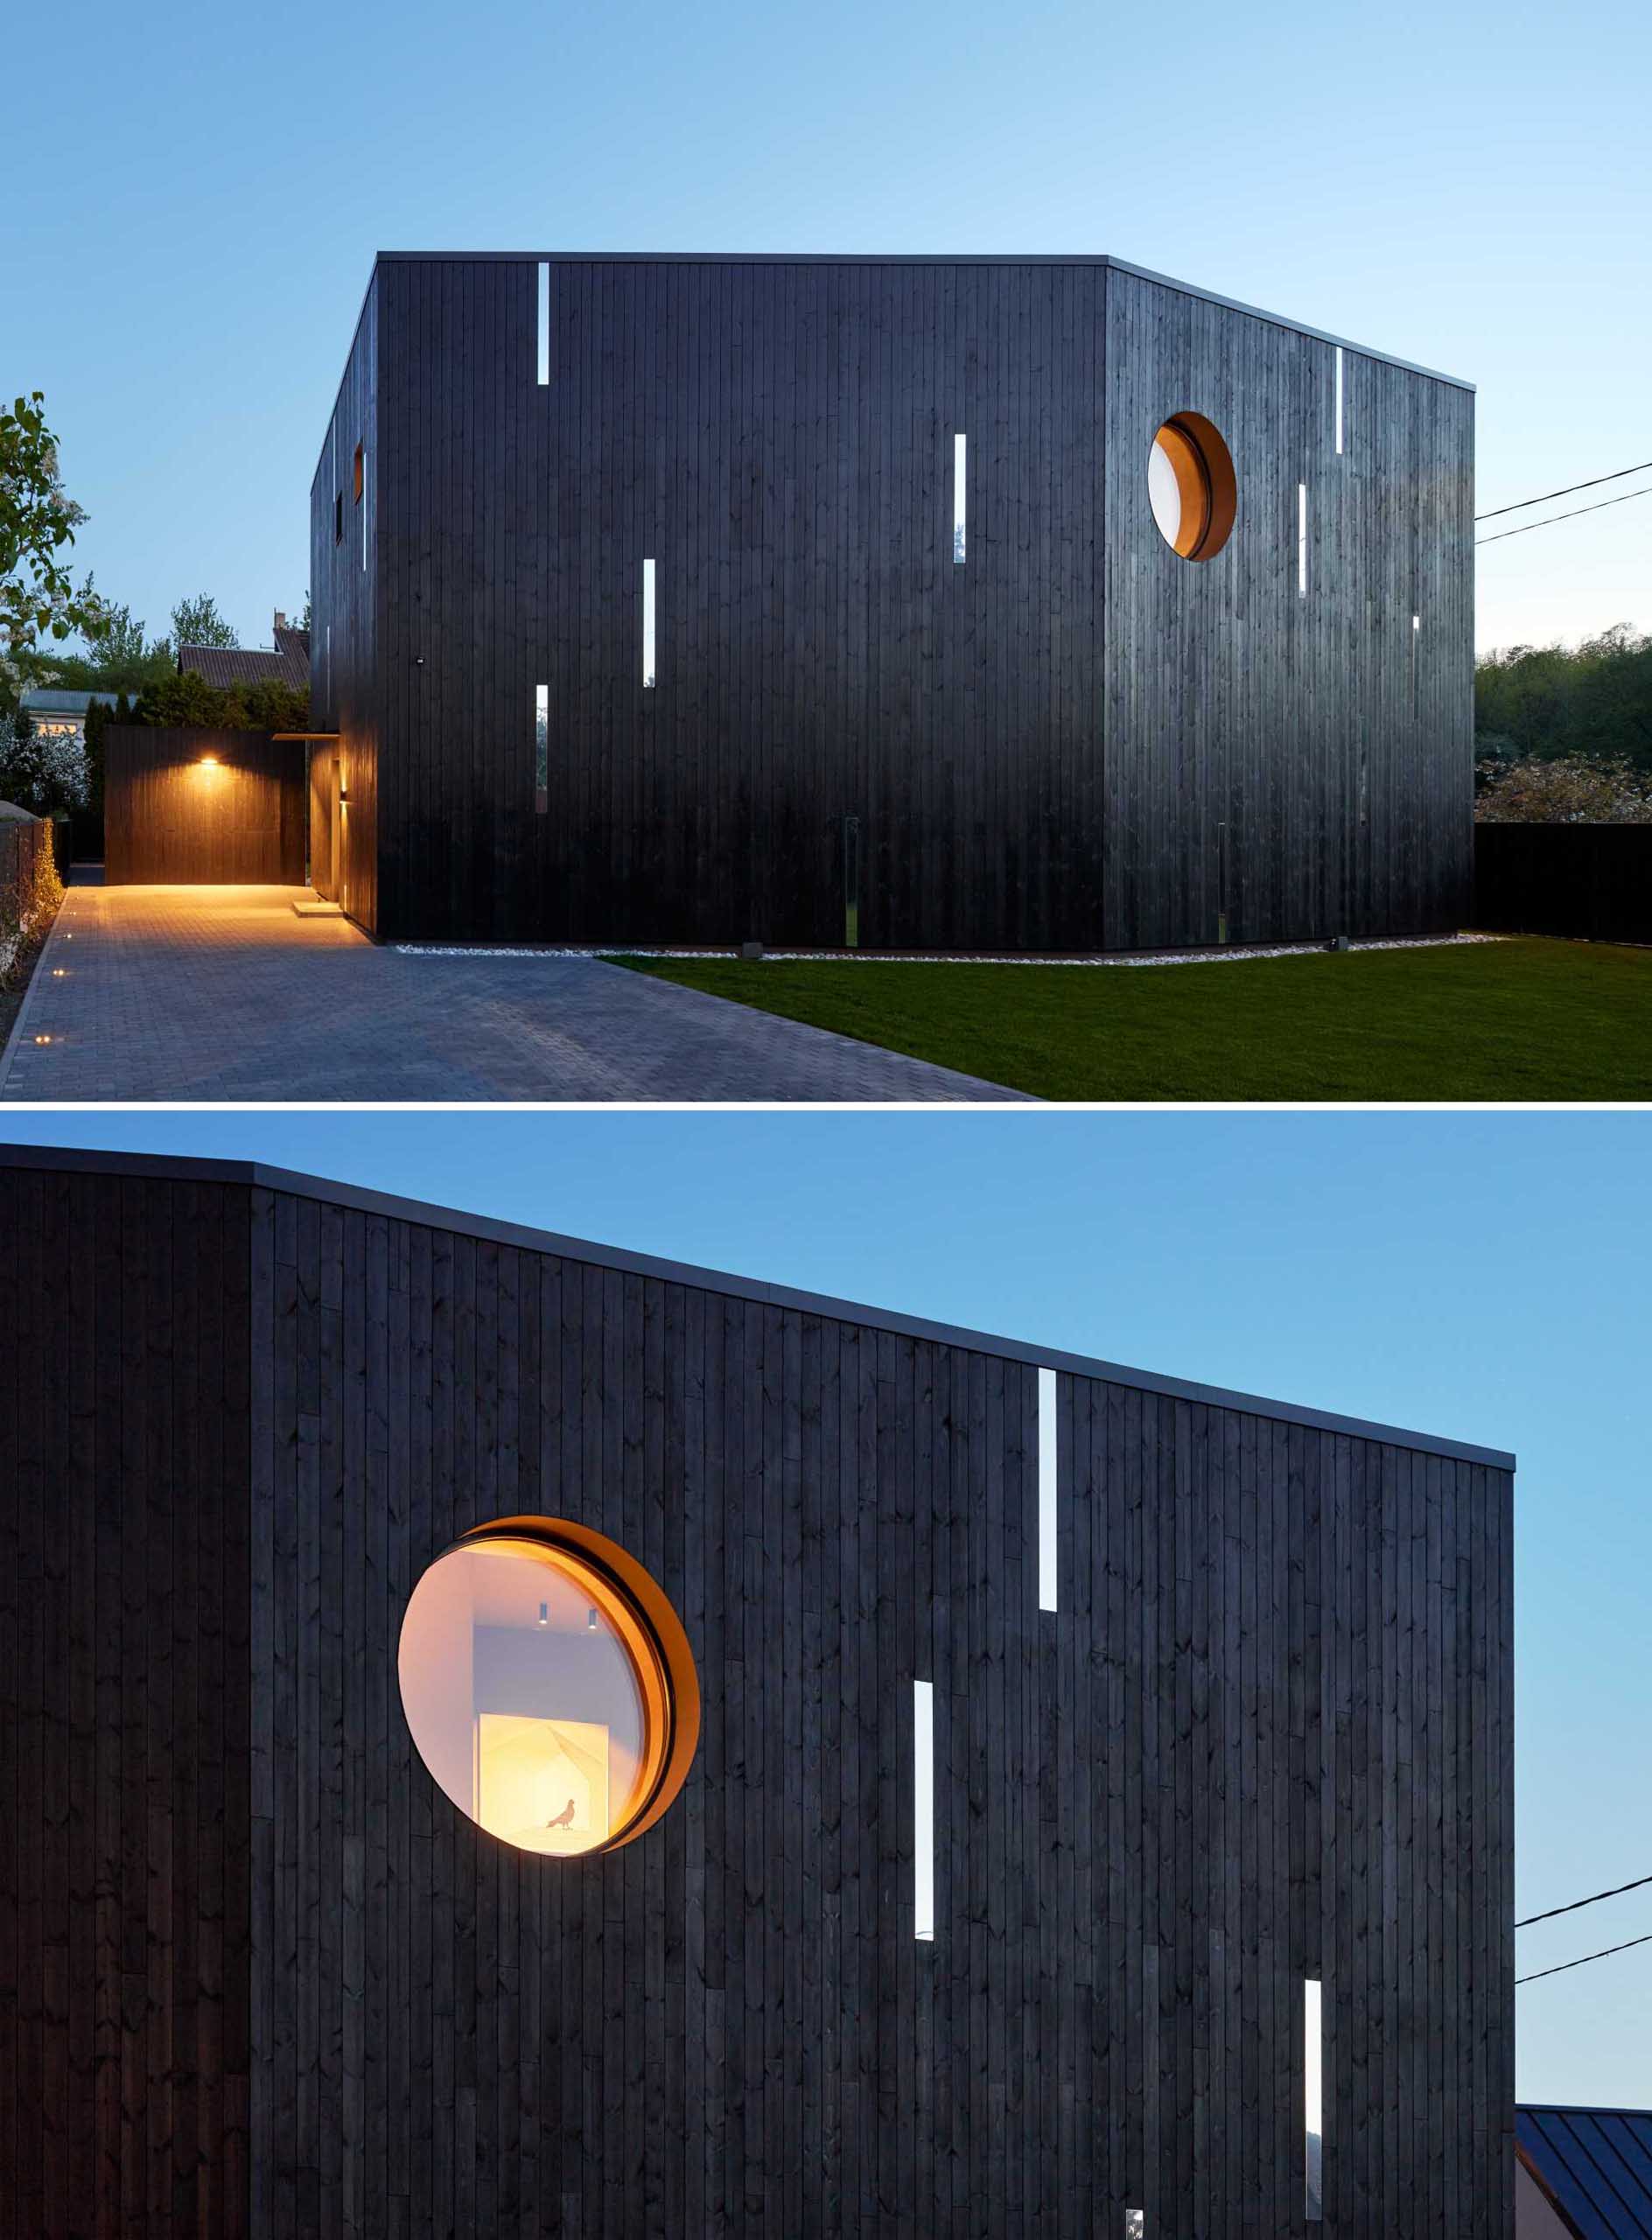 A modern house with a black wood exterior and mirrored accents.